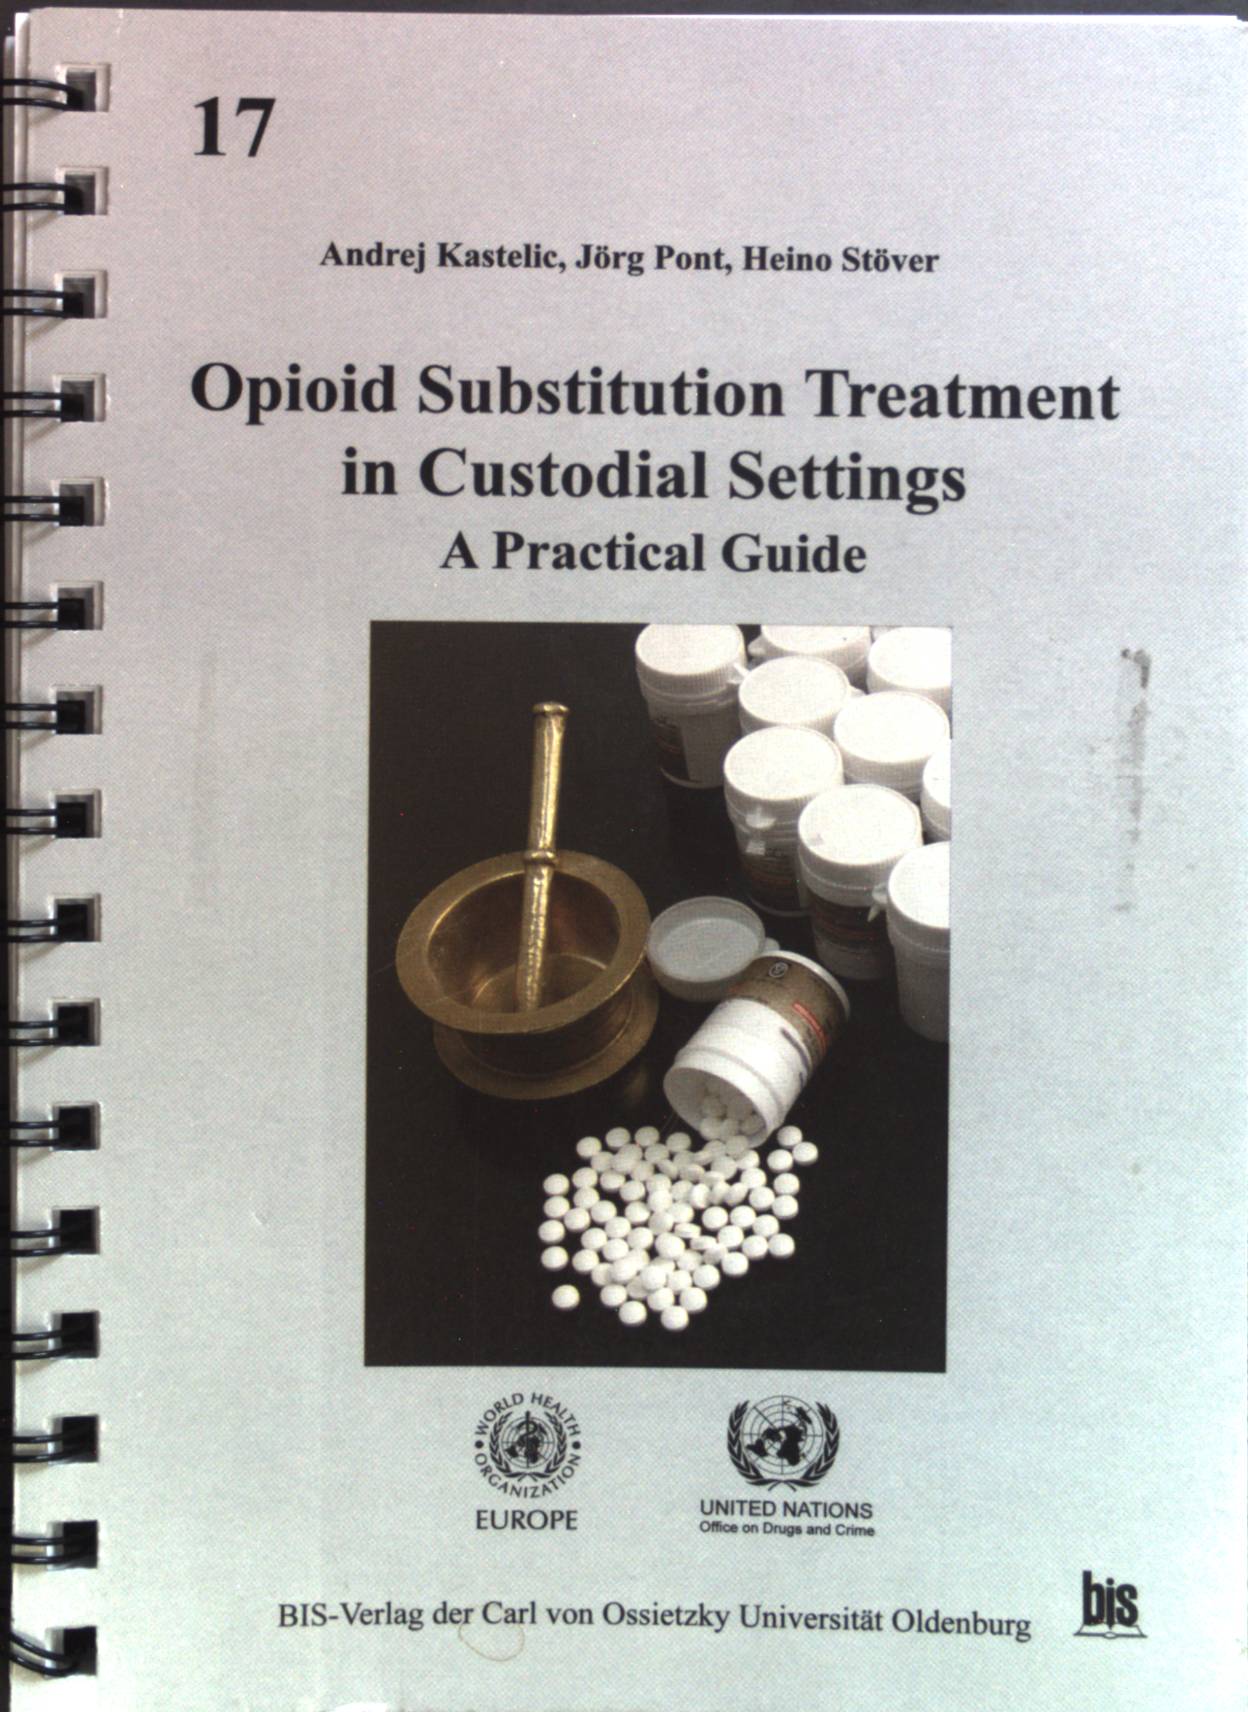 Opioid substitution treatment in custodial settings : a practical guide. Schriftenreihe 